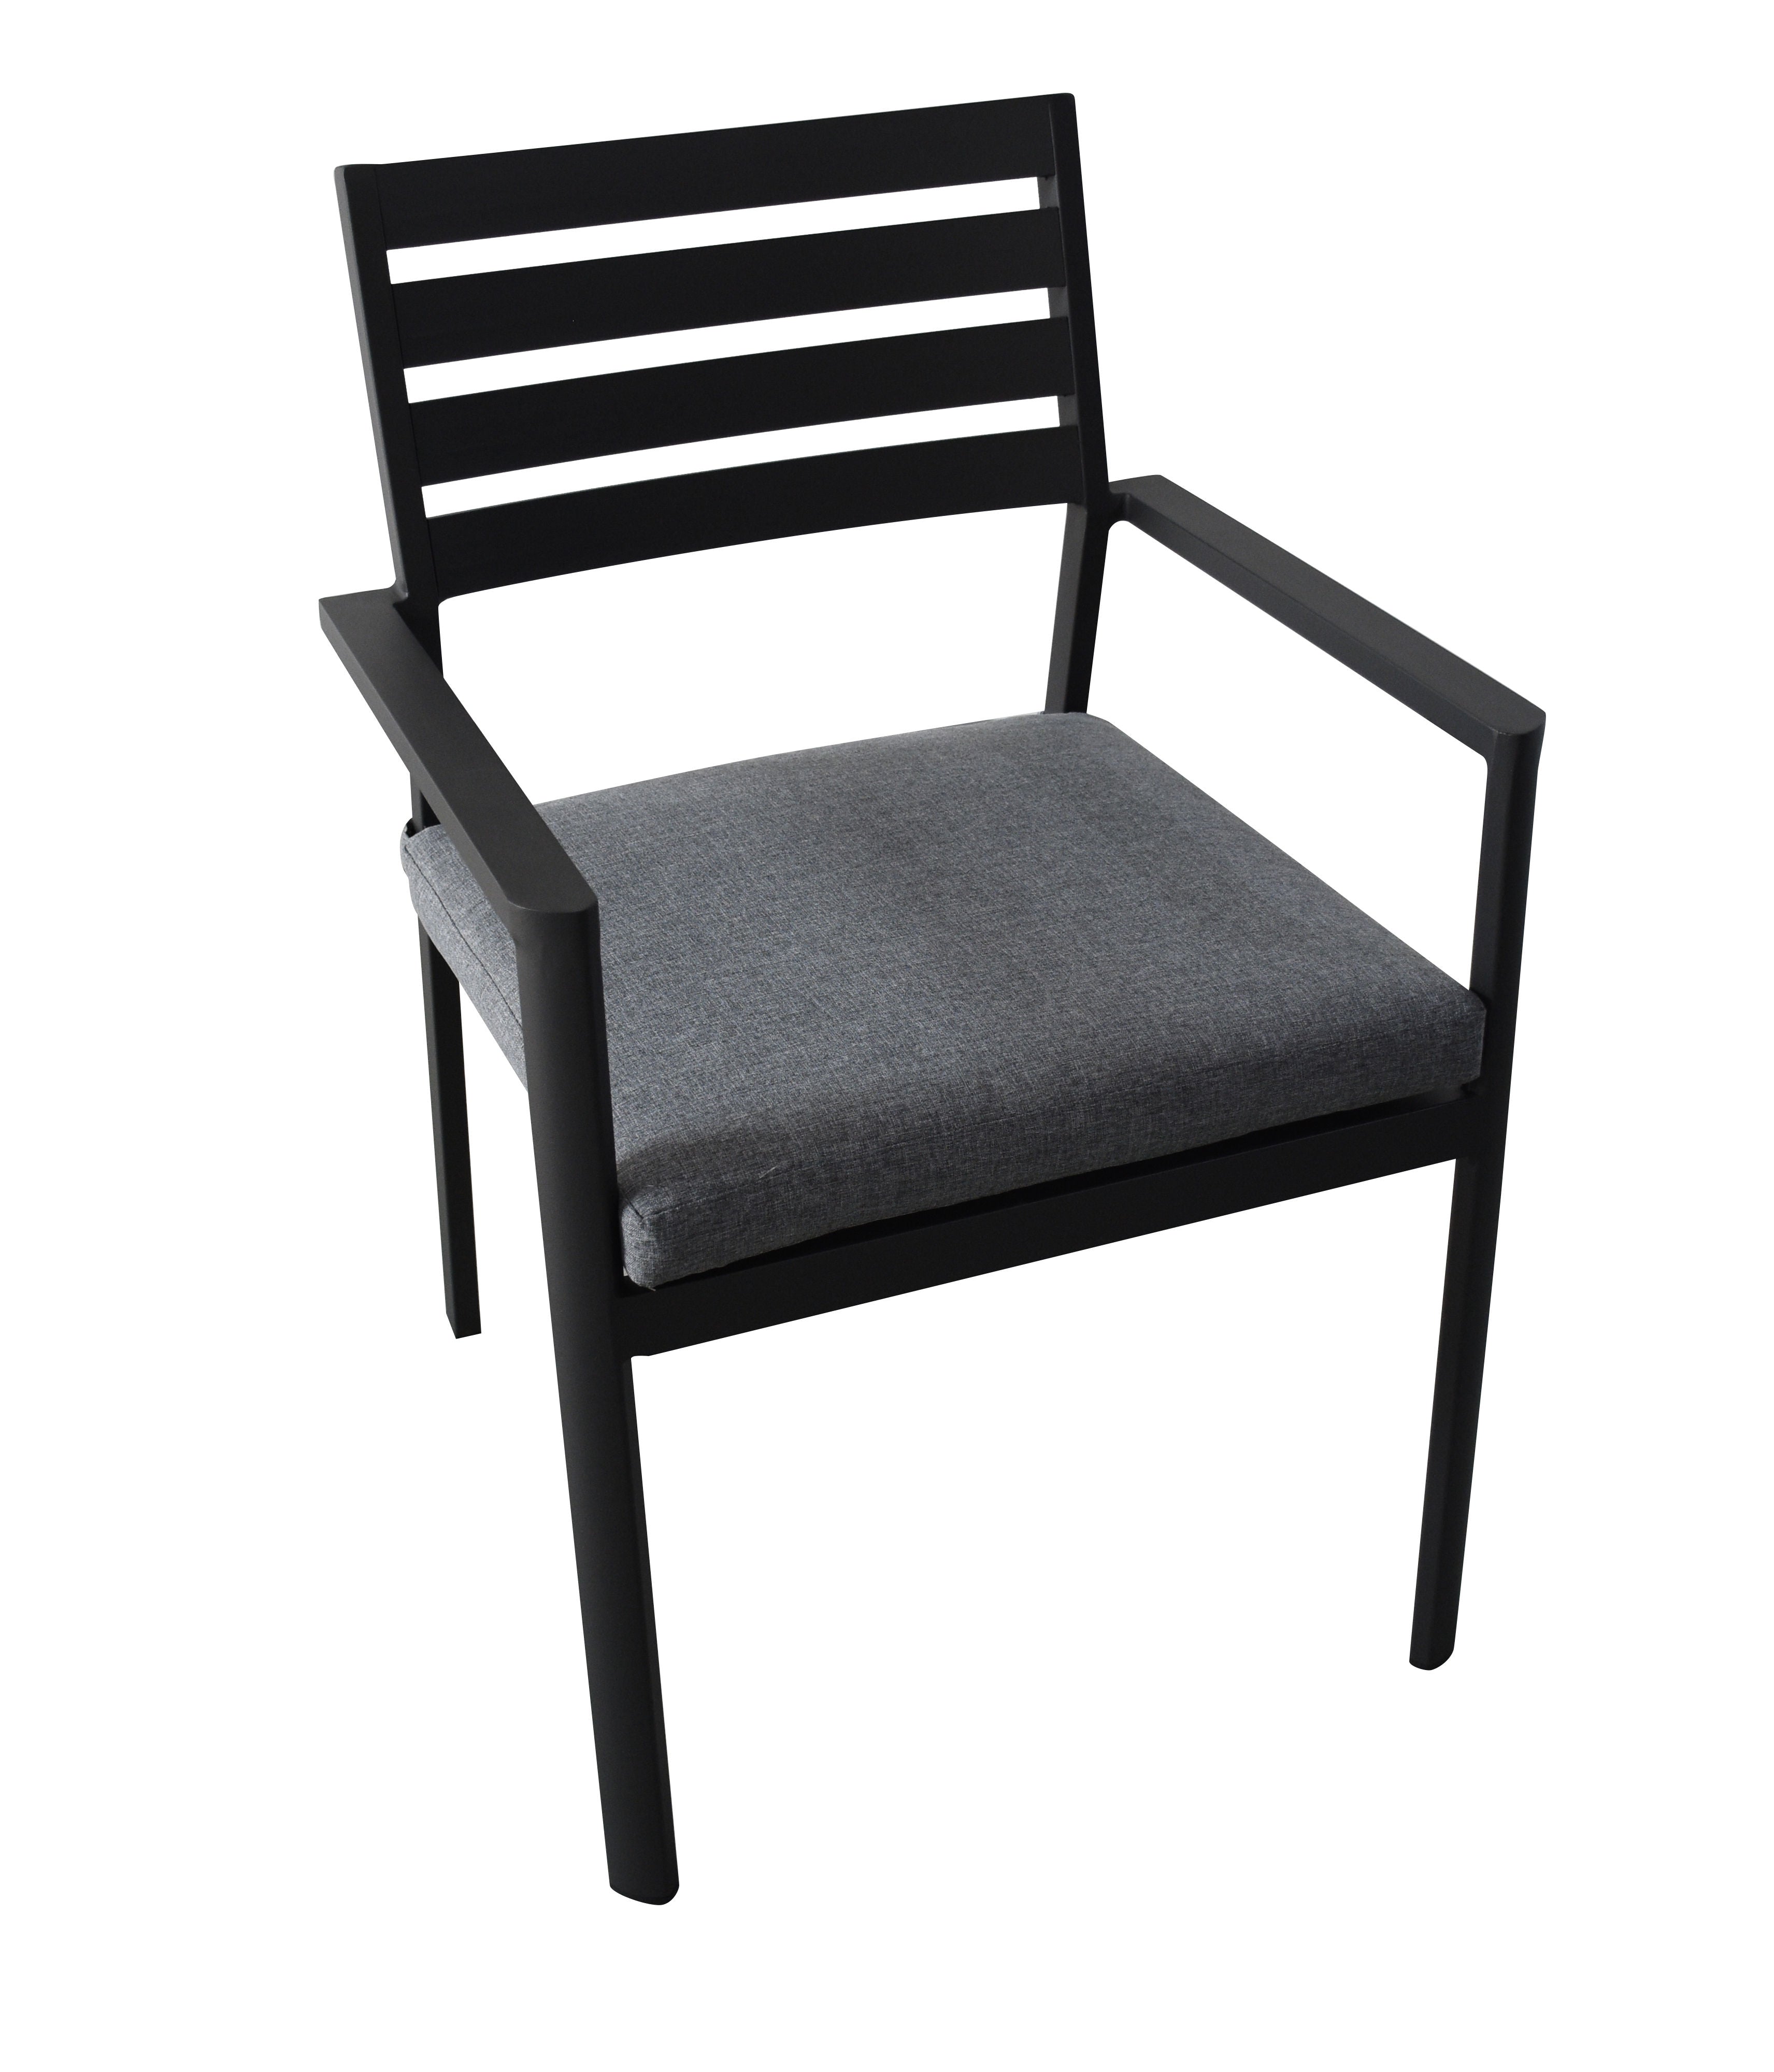 PatioZone Stackable Chair with 2" Thick Olefin Cushion and Aluminium Slats (MOSS-0817C) - Black / Heather Grey